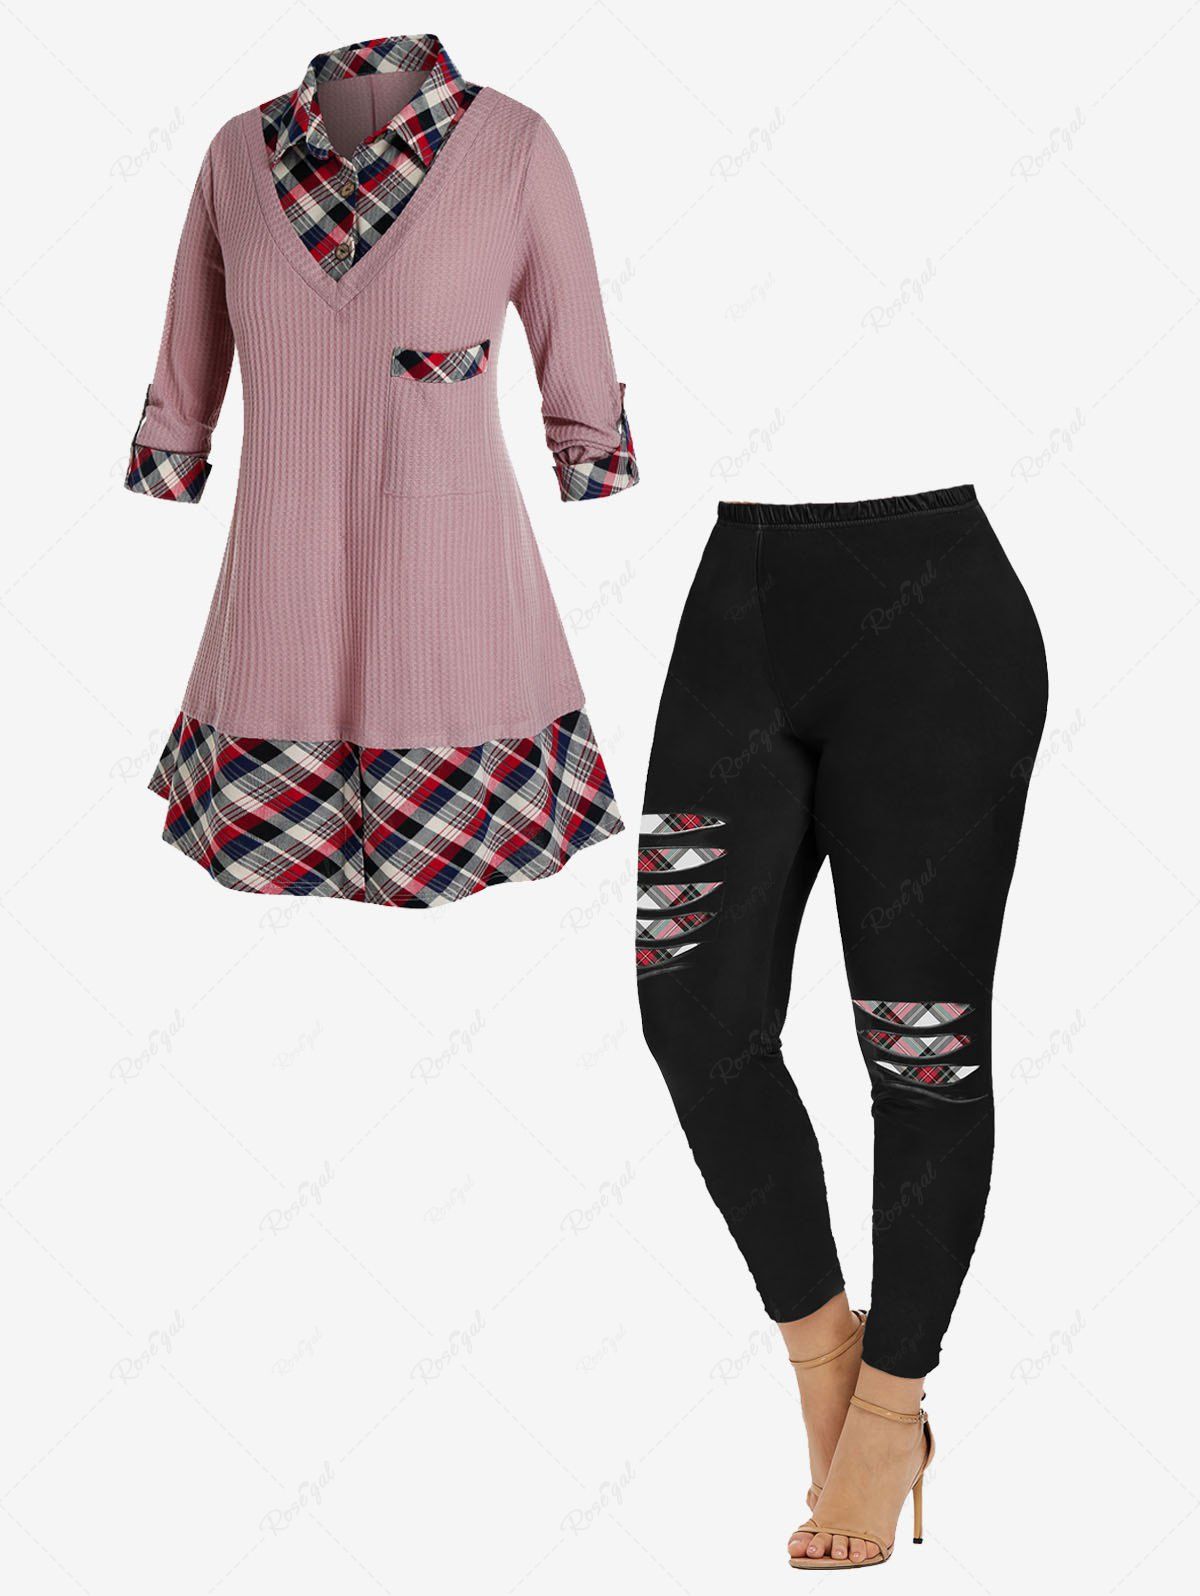 Shop 2 In 1 Plaid Shirt Collar Sweater and 3D Ripped Plaid Printed Leggings Plus Size Outerwear Outfit  